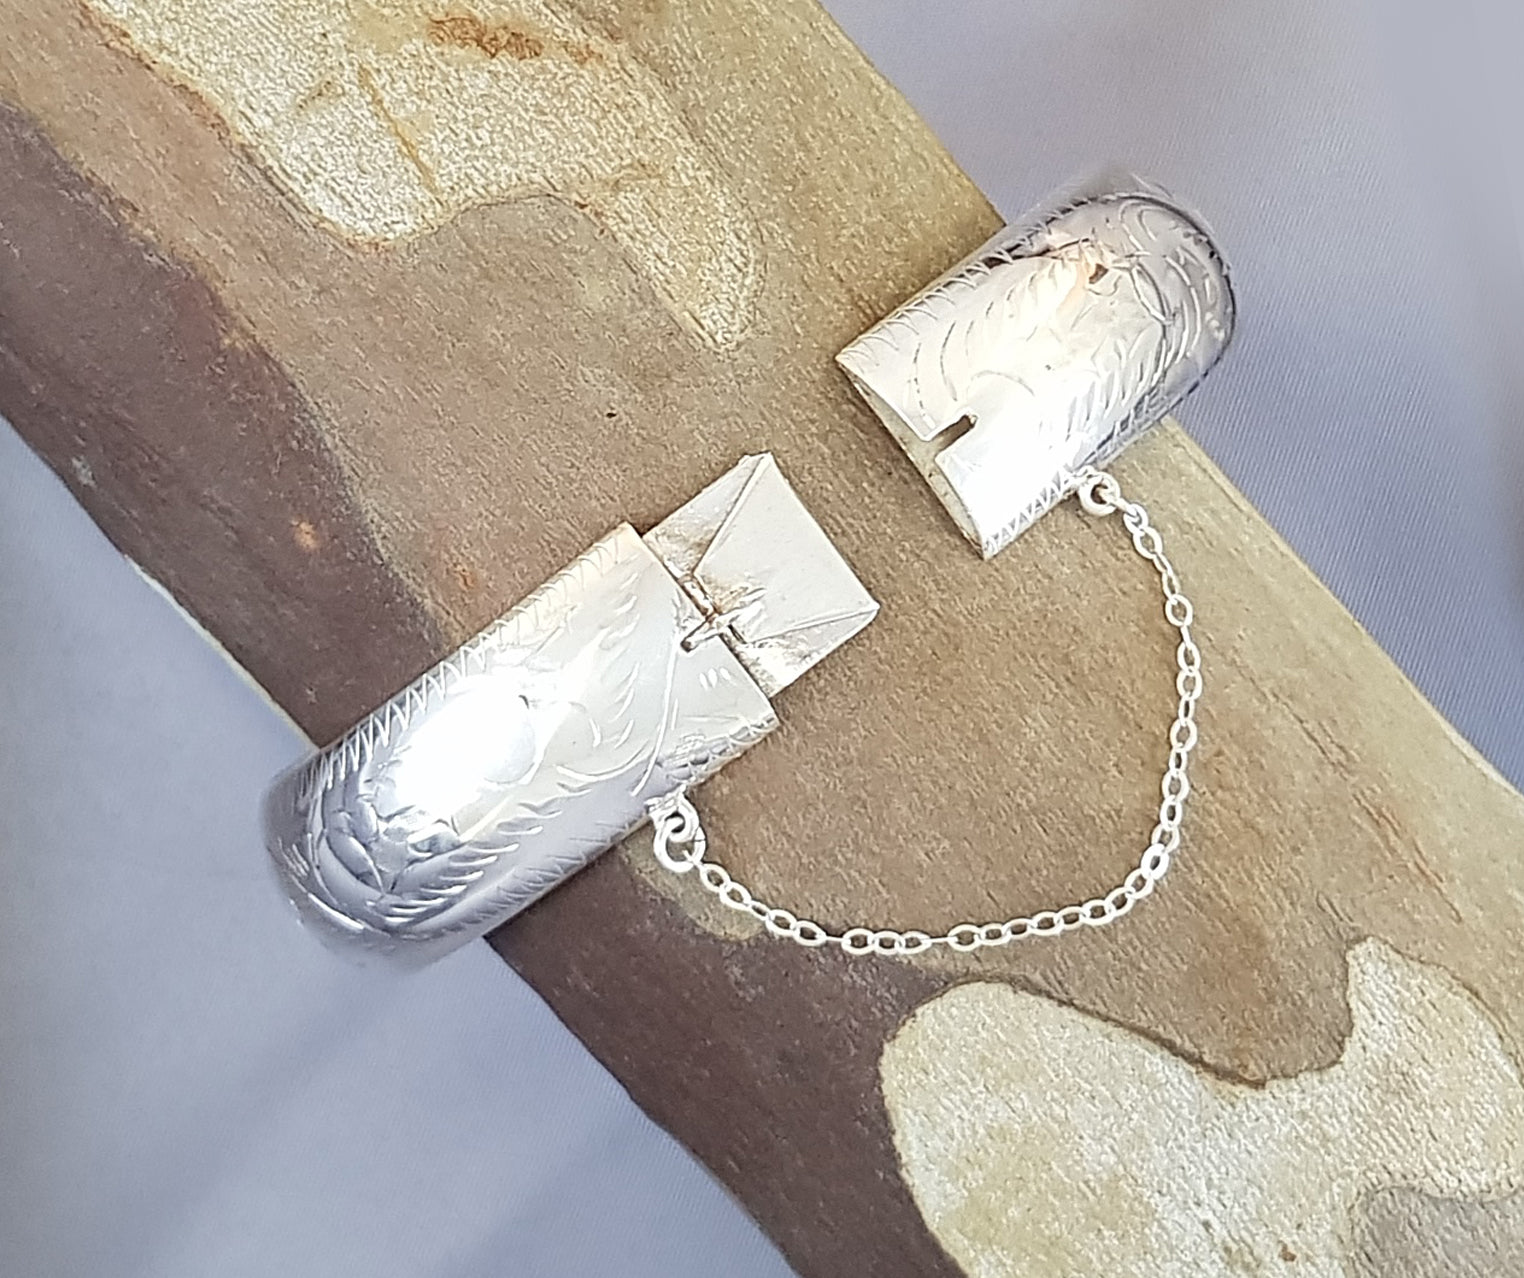 Sterling Silver Hollow Hinge Bangle with Beautiful Engraving and a Safety Chain